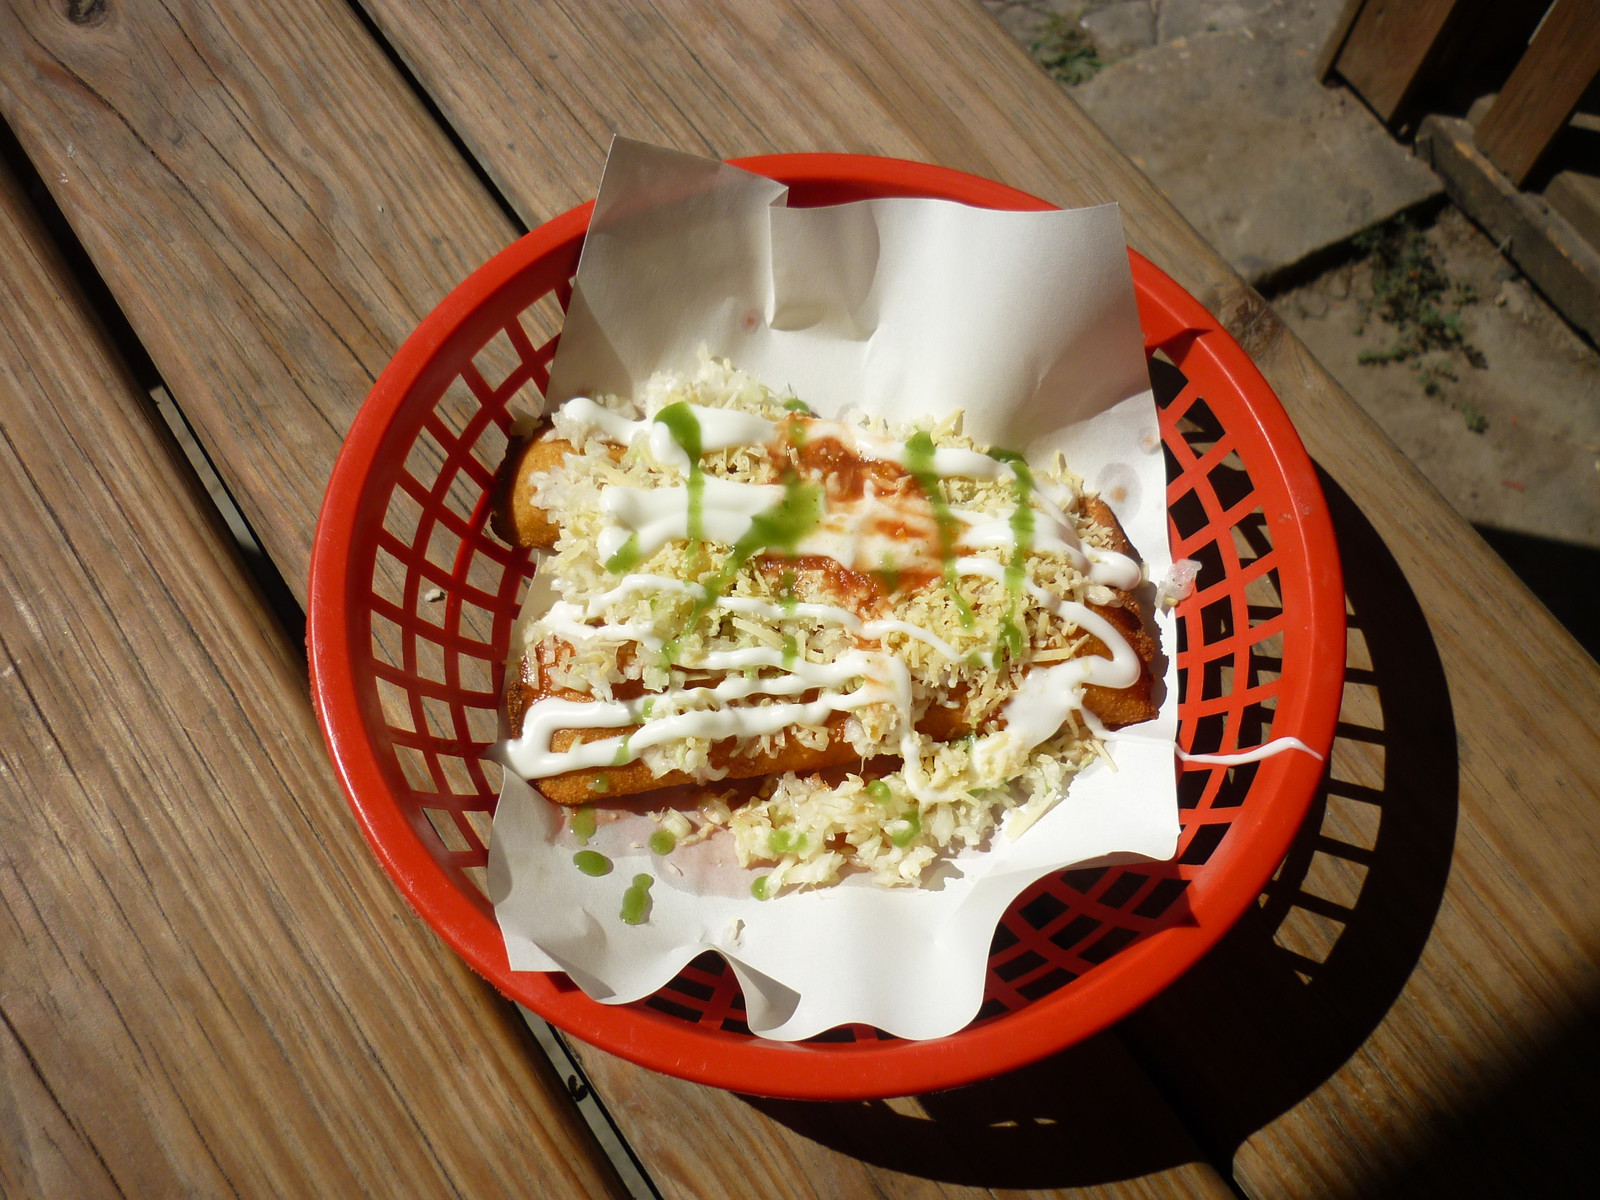 Fried tacos from Mickey's Snack Shop on Burns Avenue